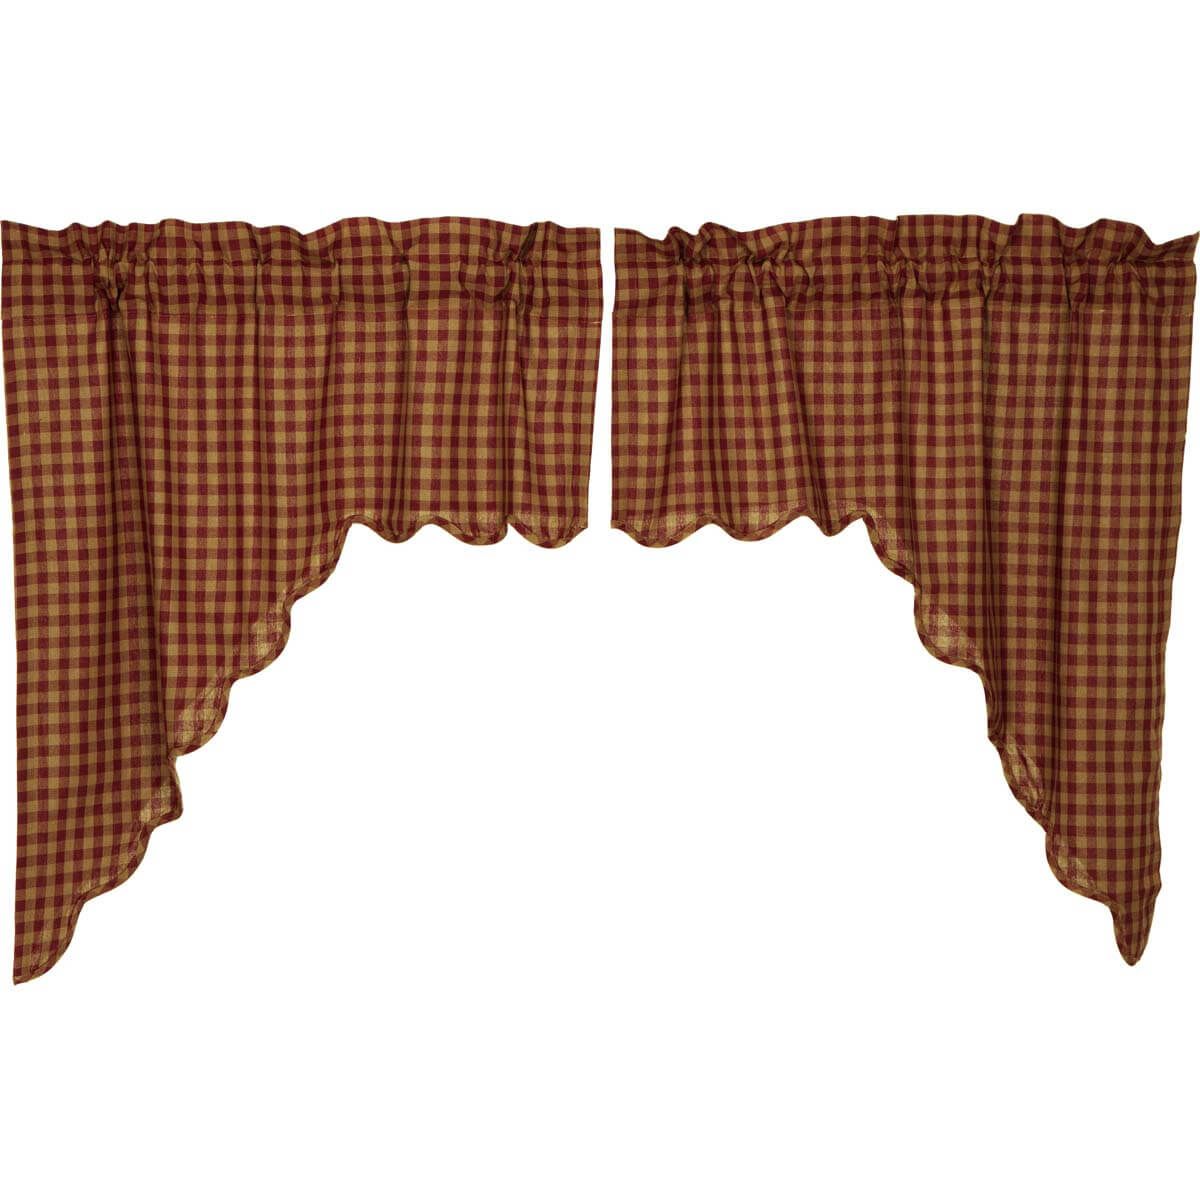 Burgundy Check Scalloped Swag Set Of 2 36x36x16 In Burgundy Cotton Blend Classic Checkered Decorative Window Curtains (View 18 of 20)